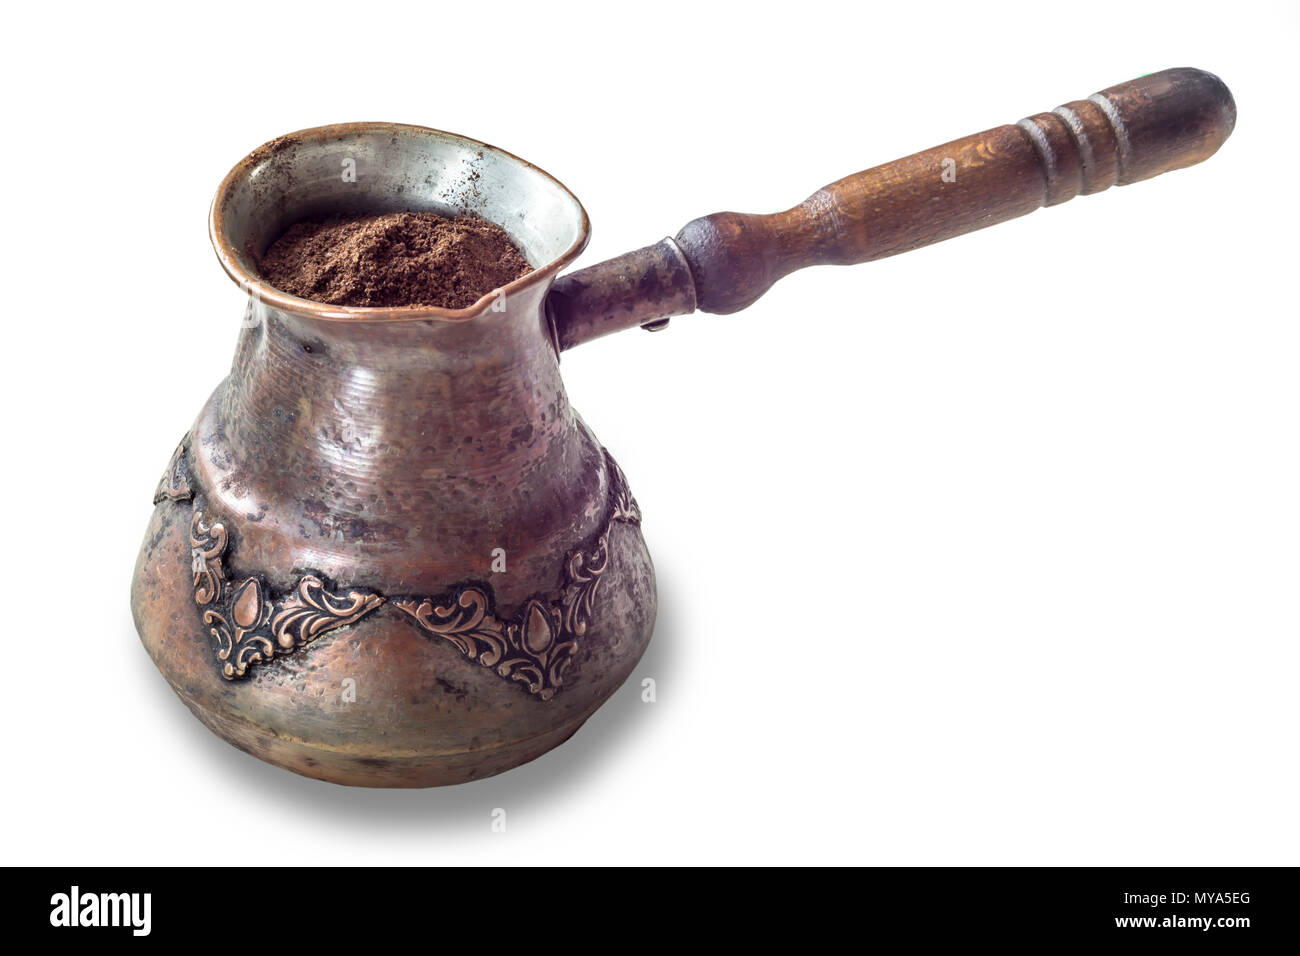 https://c8.alamy.com/comp/MYA5EG/an-old-coffee-maker-made-in-the-middle-east-copper-cup-and-wooden-handle-turkish-coffee-isolated-photo-on-a-white-background-MYA5EG.jpg